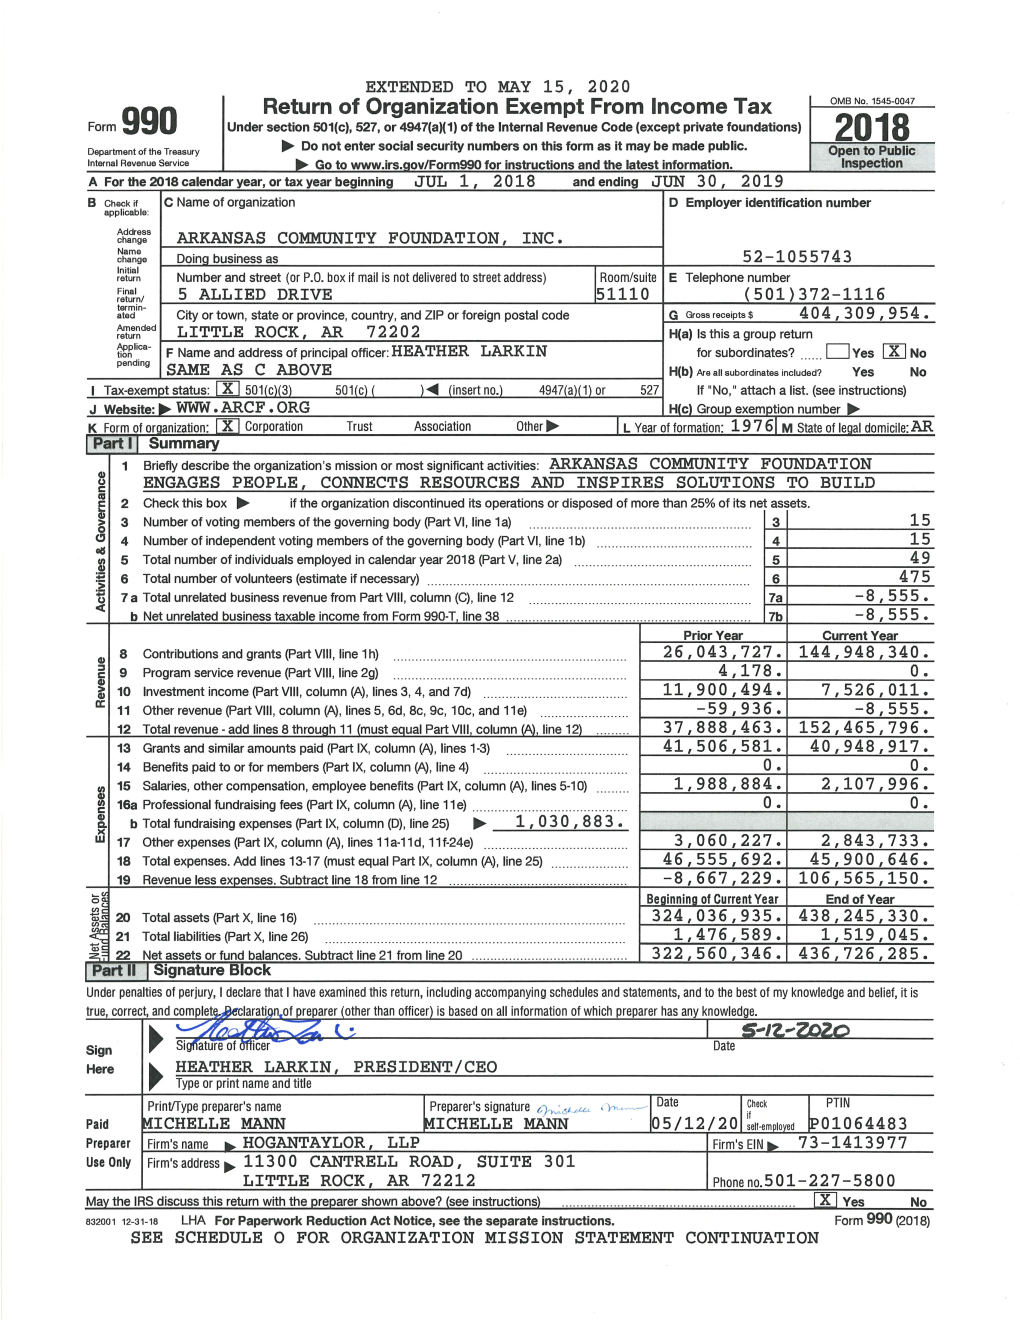 FY 2019 Form